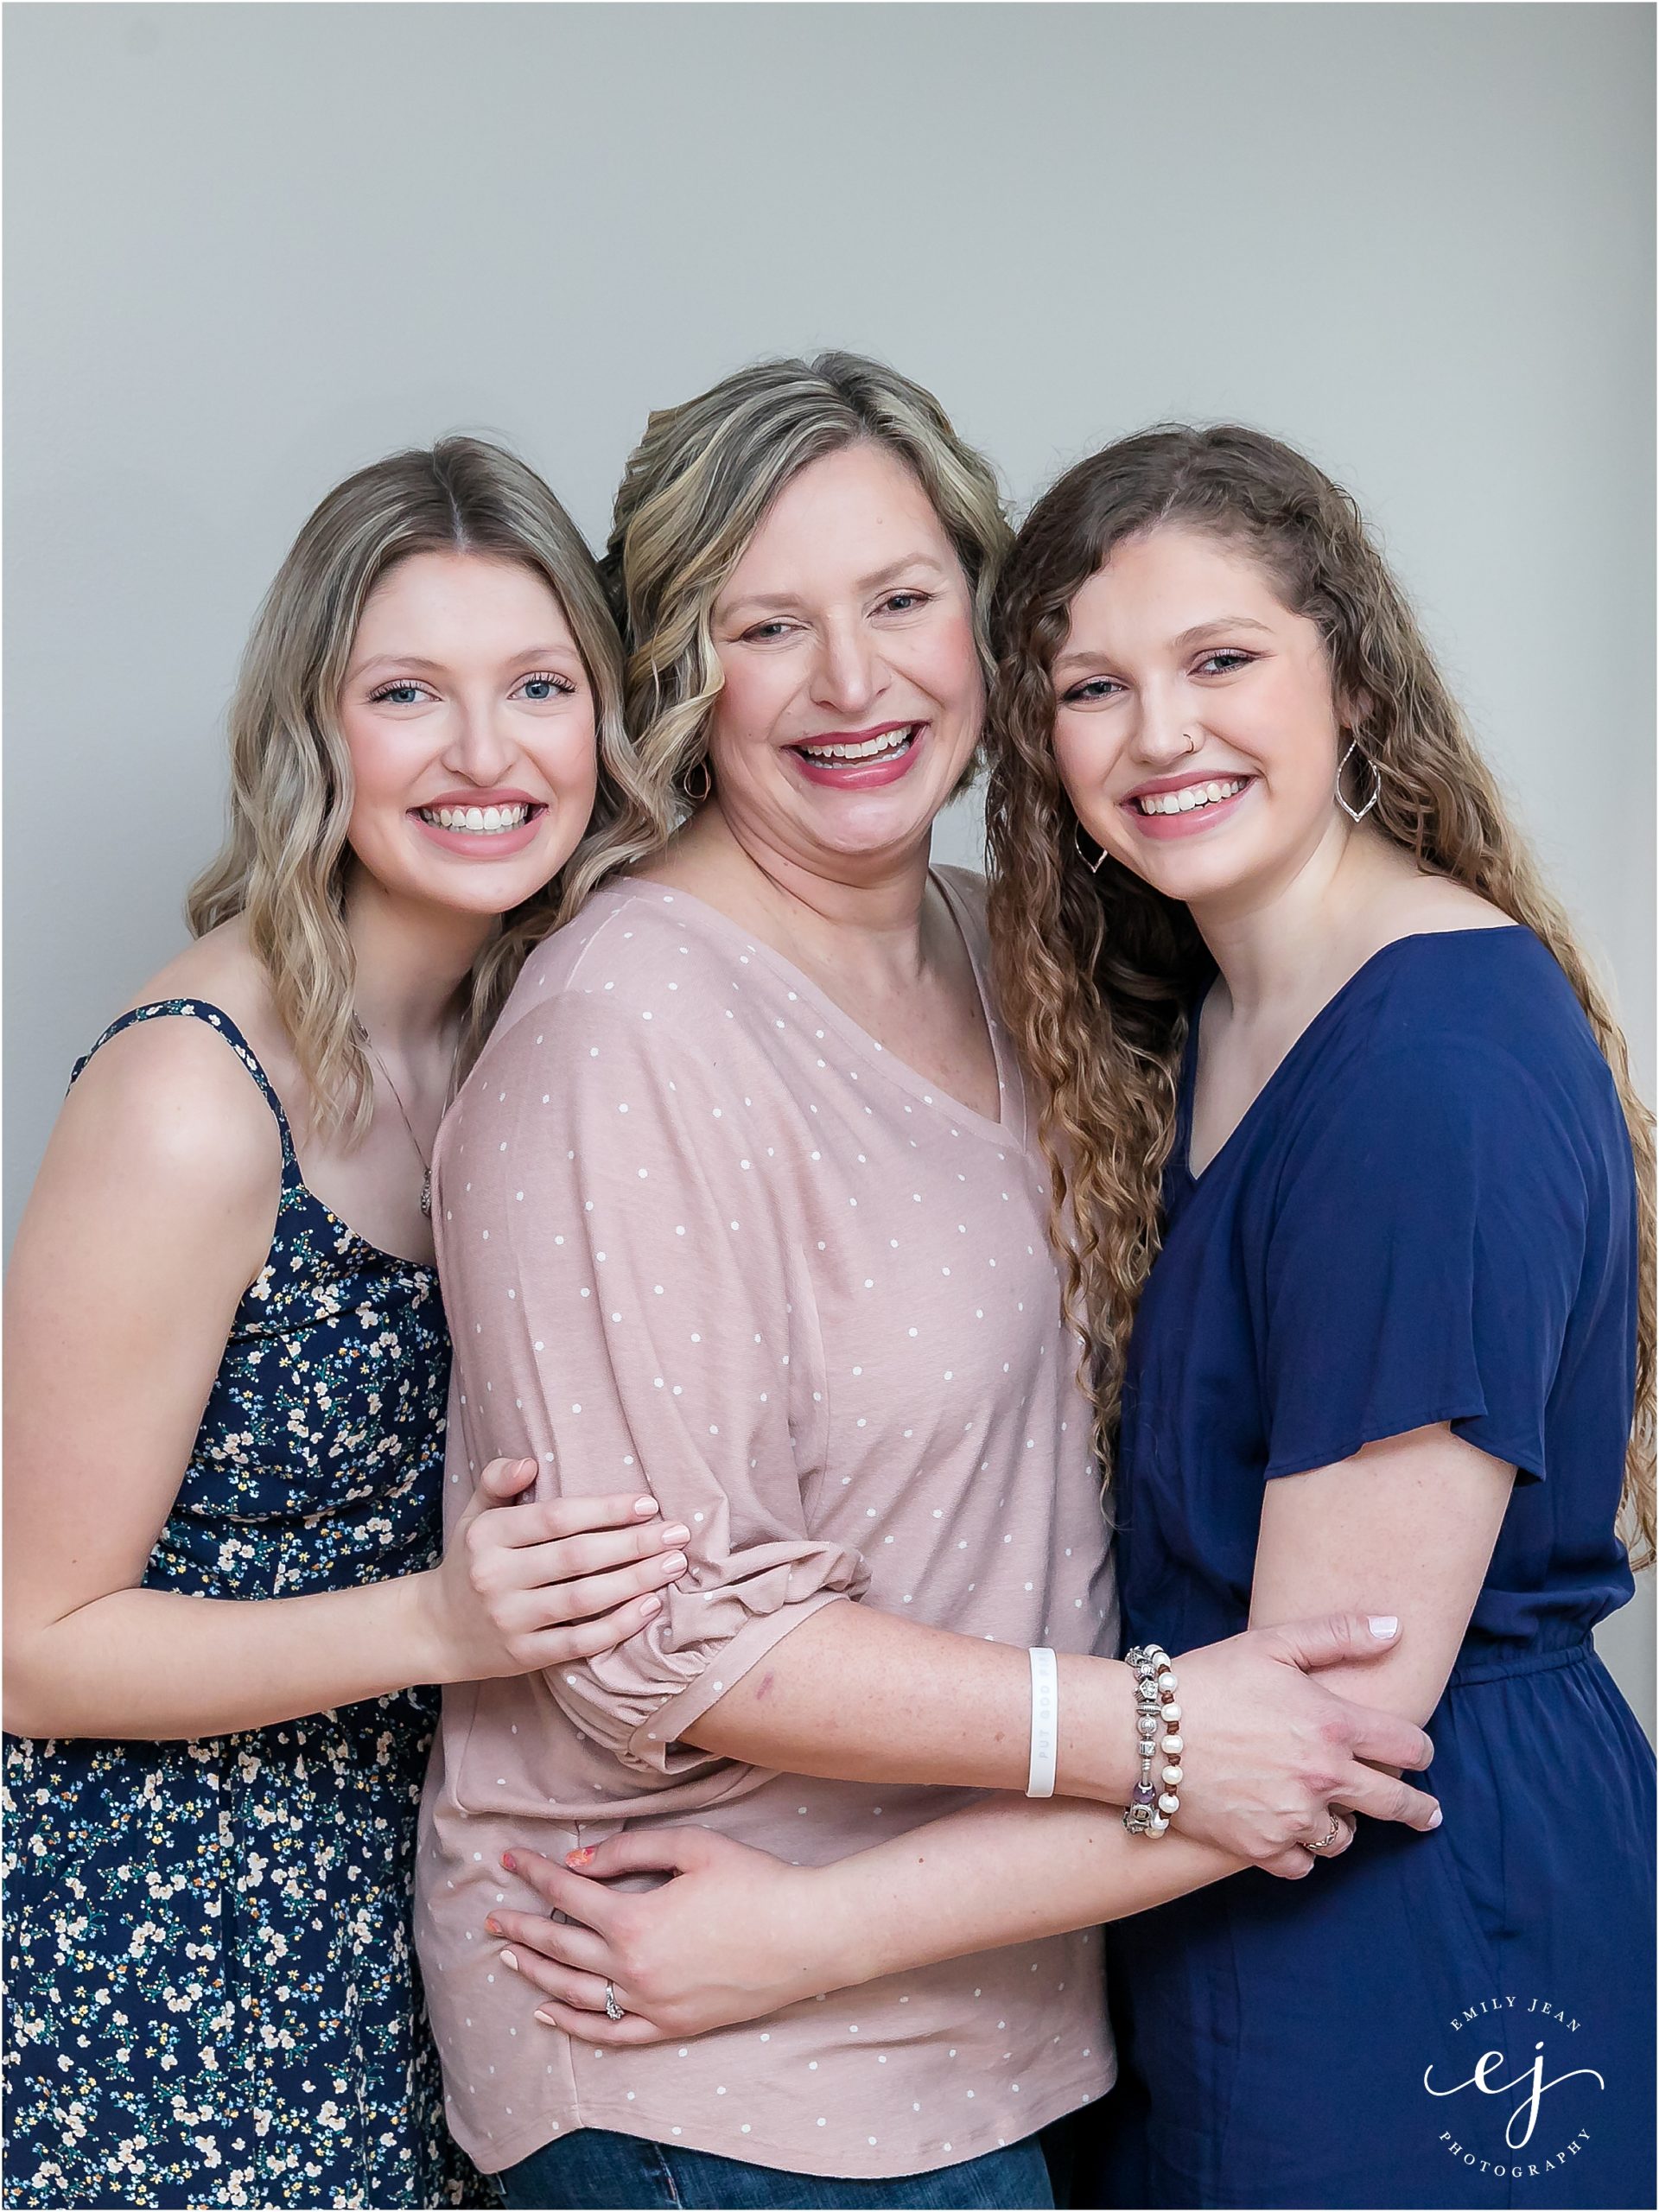 Mom and her adult daughters hugging smiling and looking at the camera